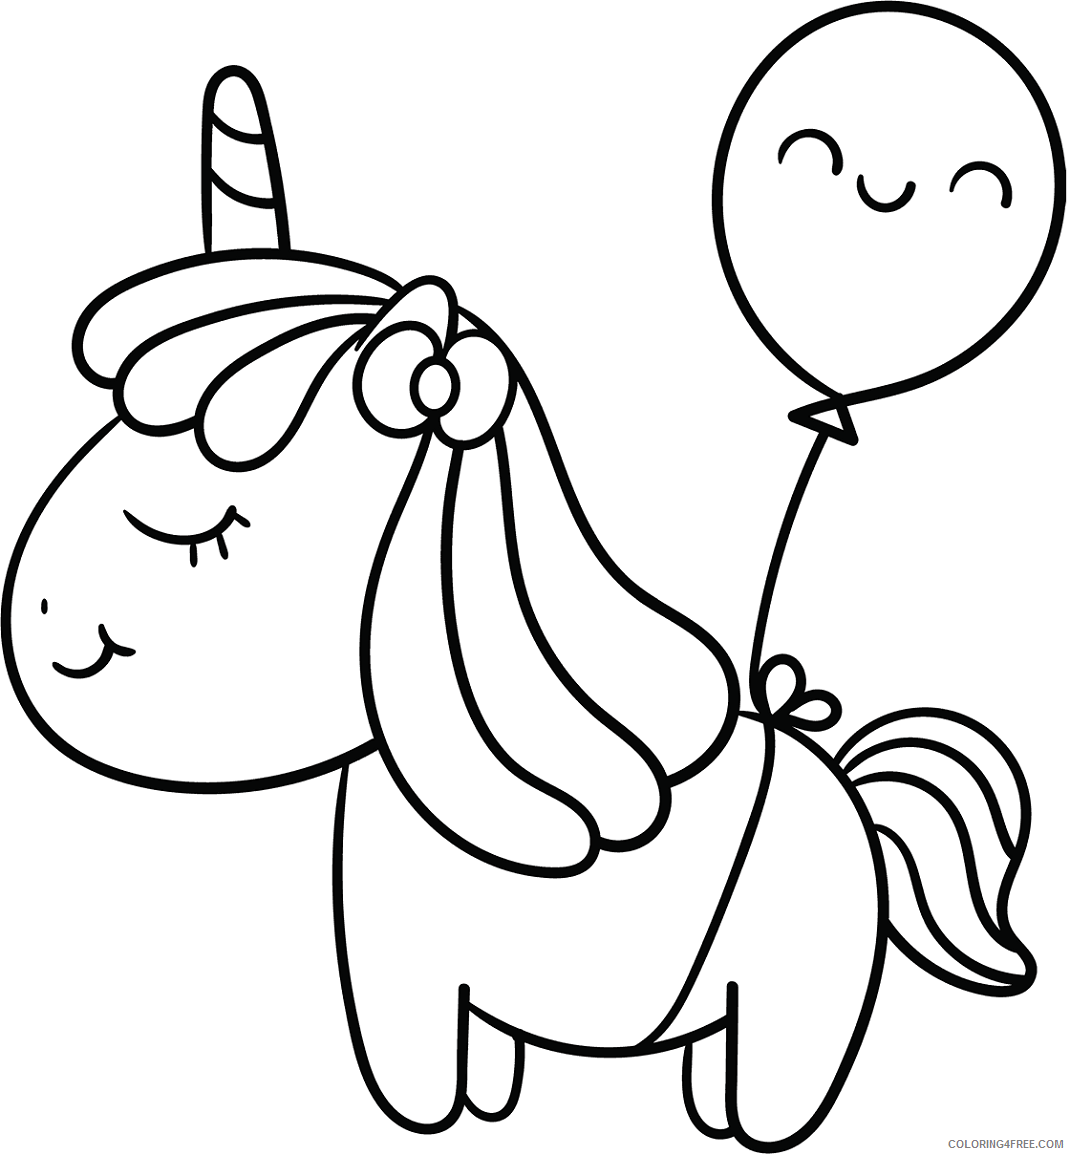 Unicorn Coloring Pages baby_unicorn_with_a_balloon Printable 2021 6021 Coloring4free